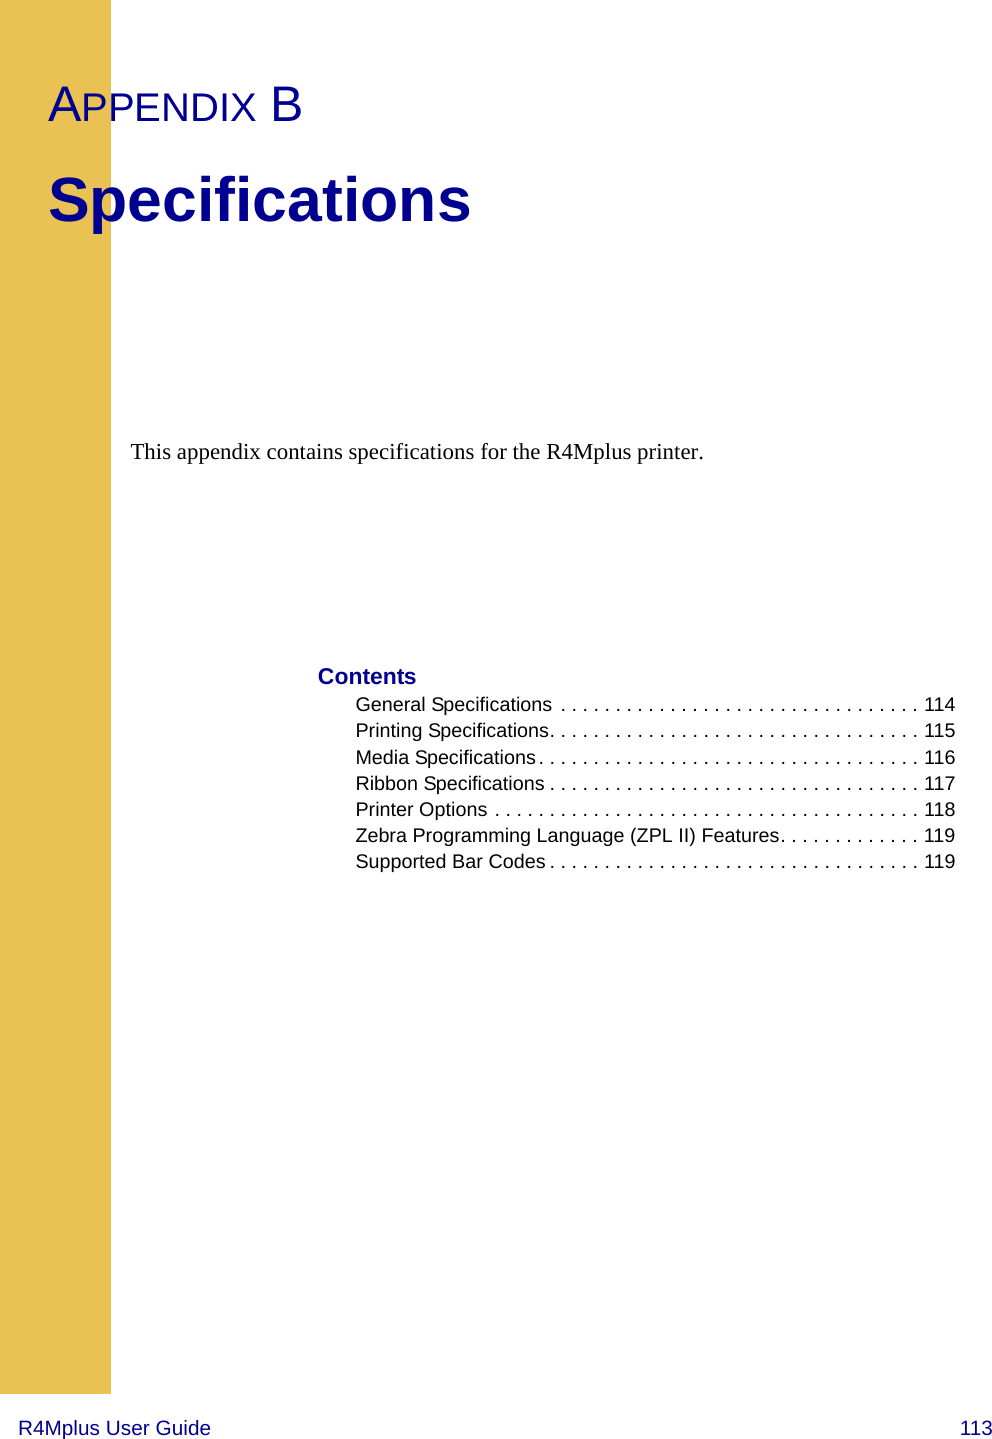 R4Mplus User Guide  113APPENDIX BSpecificationsThis appendix contains specifications for the R4Mplus printer.ContentsGeneral Specifications  . . . . . . . . . . . . . . . . . . . . . . . . . . . . . . . . . 114Printing Specifications. . . . . . . . . . . . . . . . . . . . . . . . . . . . . . . . . . 115Media Specifications . . . . . . . . . . . . . . . . . . . . . . . . . . . . . . . . . . . 116Ribbon Specifications . . . . . . . . . . . . . . . . . . . . . . . . . . . . . . . . . . 117Printer Options . . . . . . . . . . . . . . . . . . . . . . . . . . . . . . . . . . . . . . . 118Zebra Programming Language (ZPL II) Features. . . . . . . . . . . . . 119Supported Bar Codes . . . . . . . . . . . . . . . . . . . . . . . . . . . . . . . . . . 119